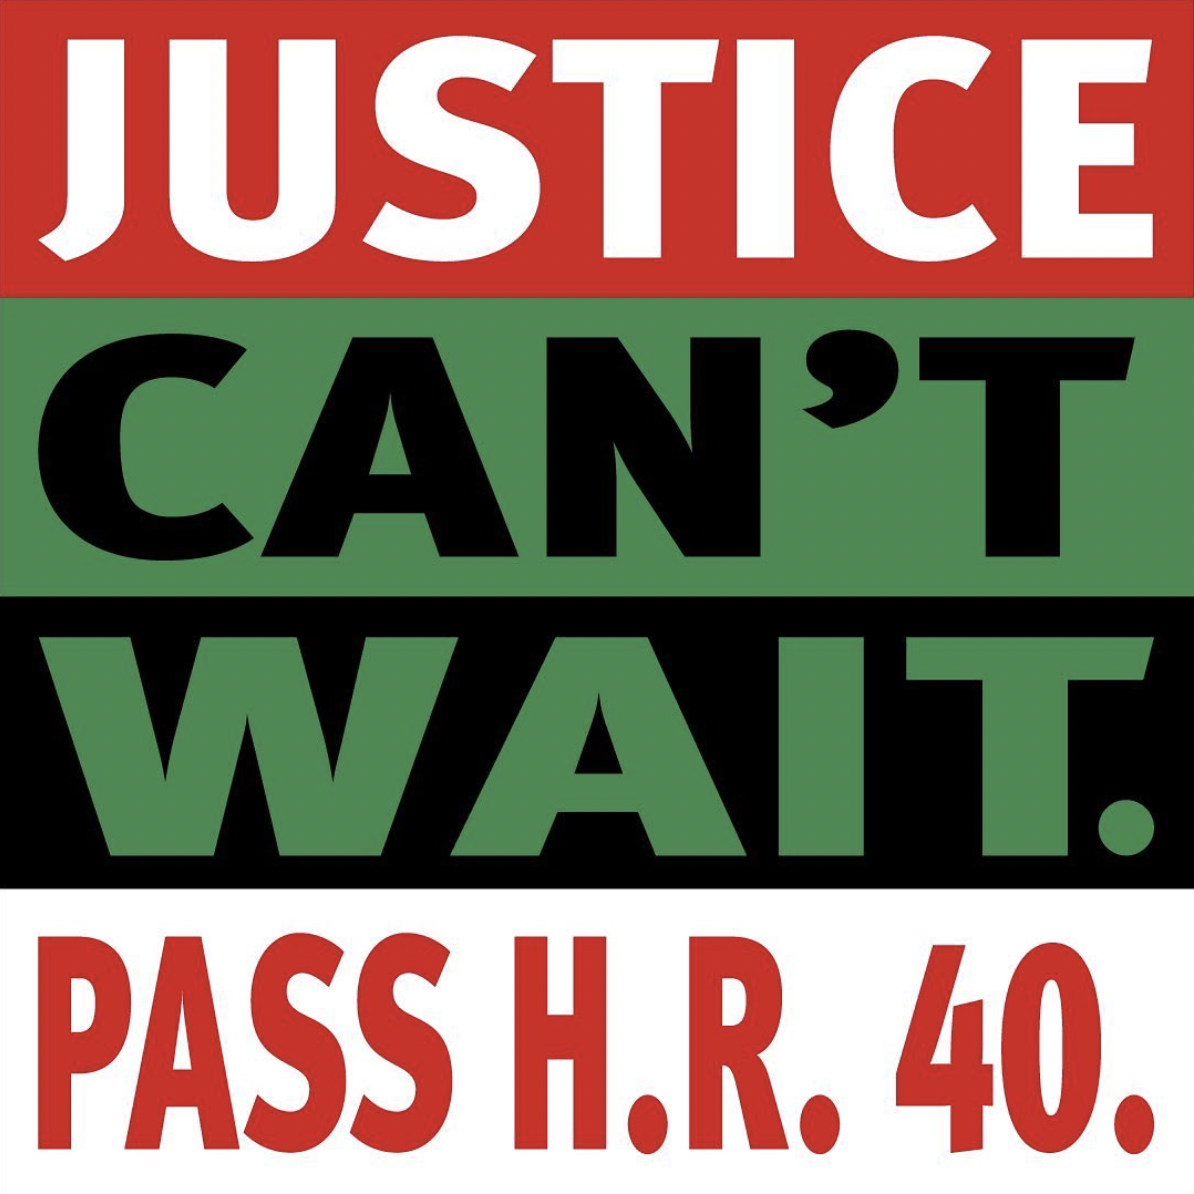 Support for HR 40